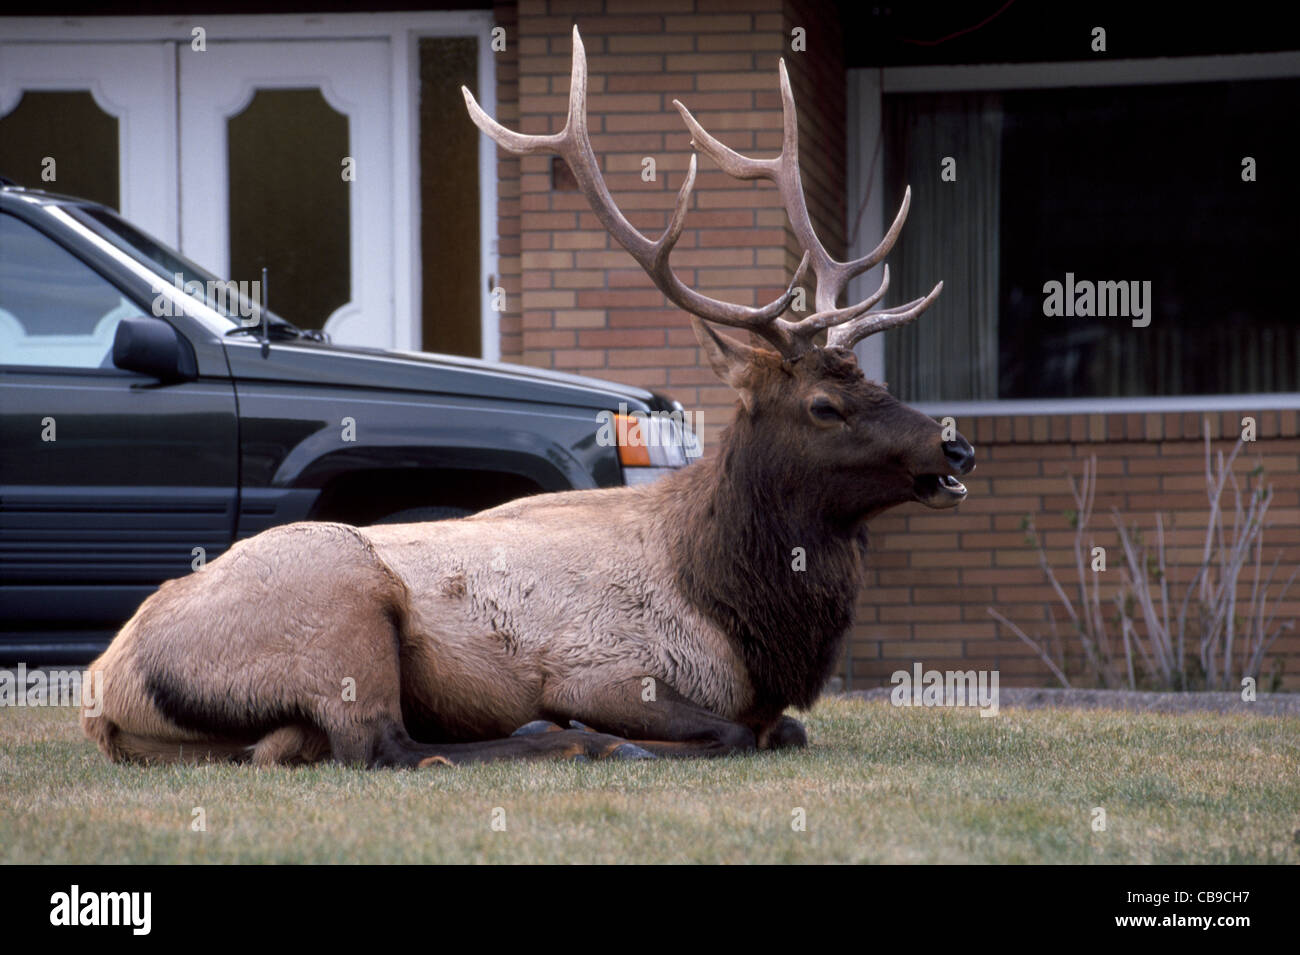 A bull elk with a handsome rack of antlers rests on the lawn of a home in the resort town of Banff in Alberta, Canada, where elks are a common sight. Stock Photo